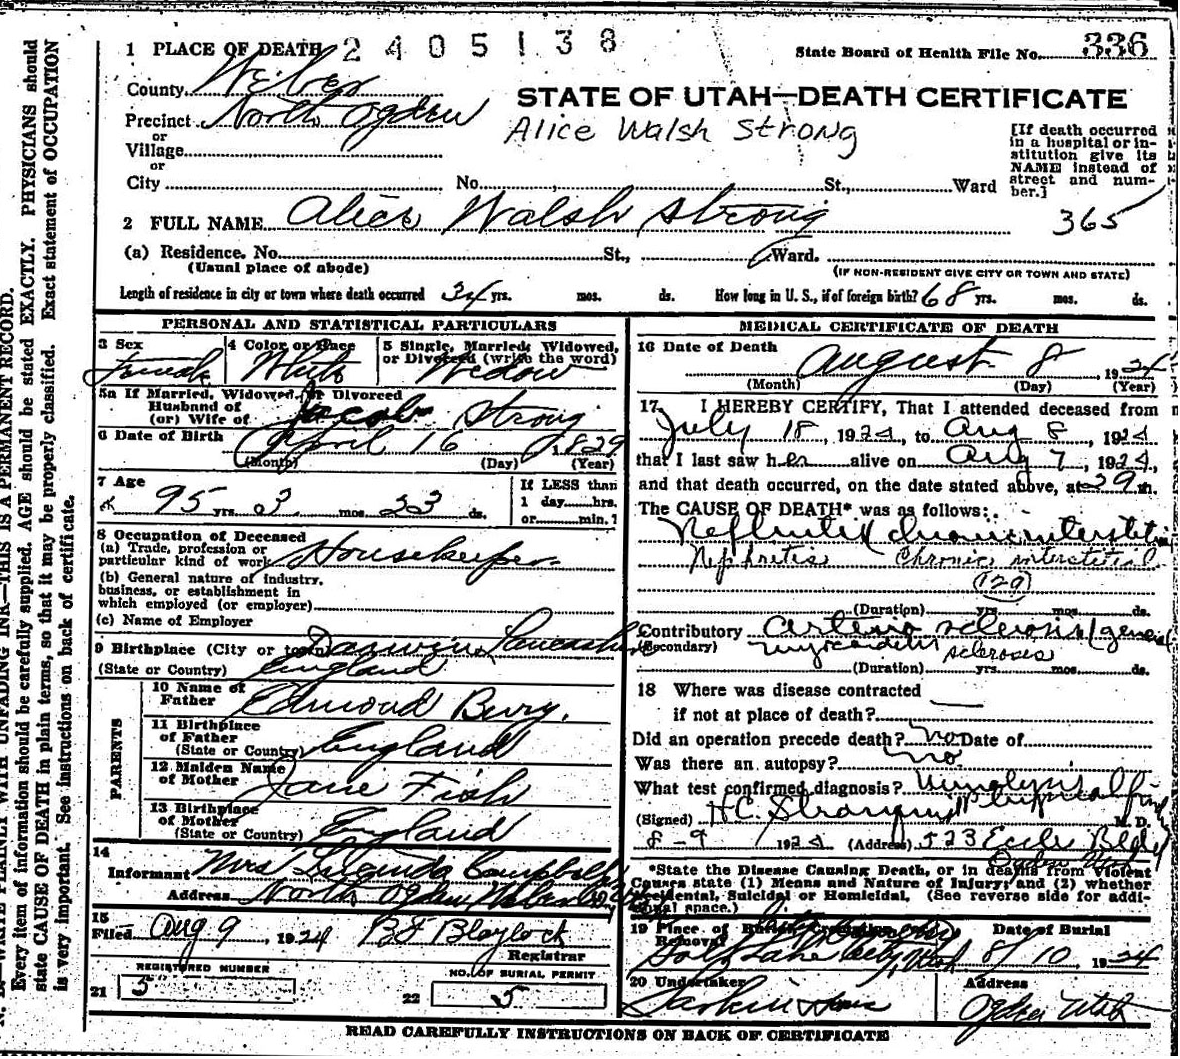 Alice Fish Bury Walsh Strong's death certificate.